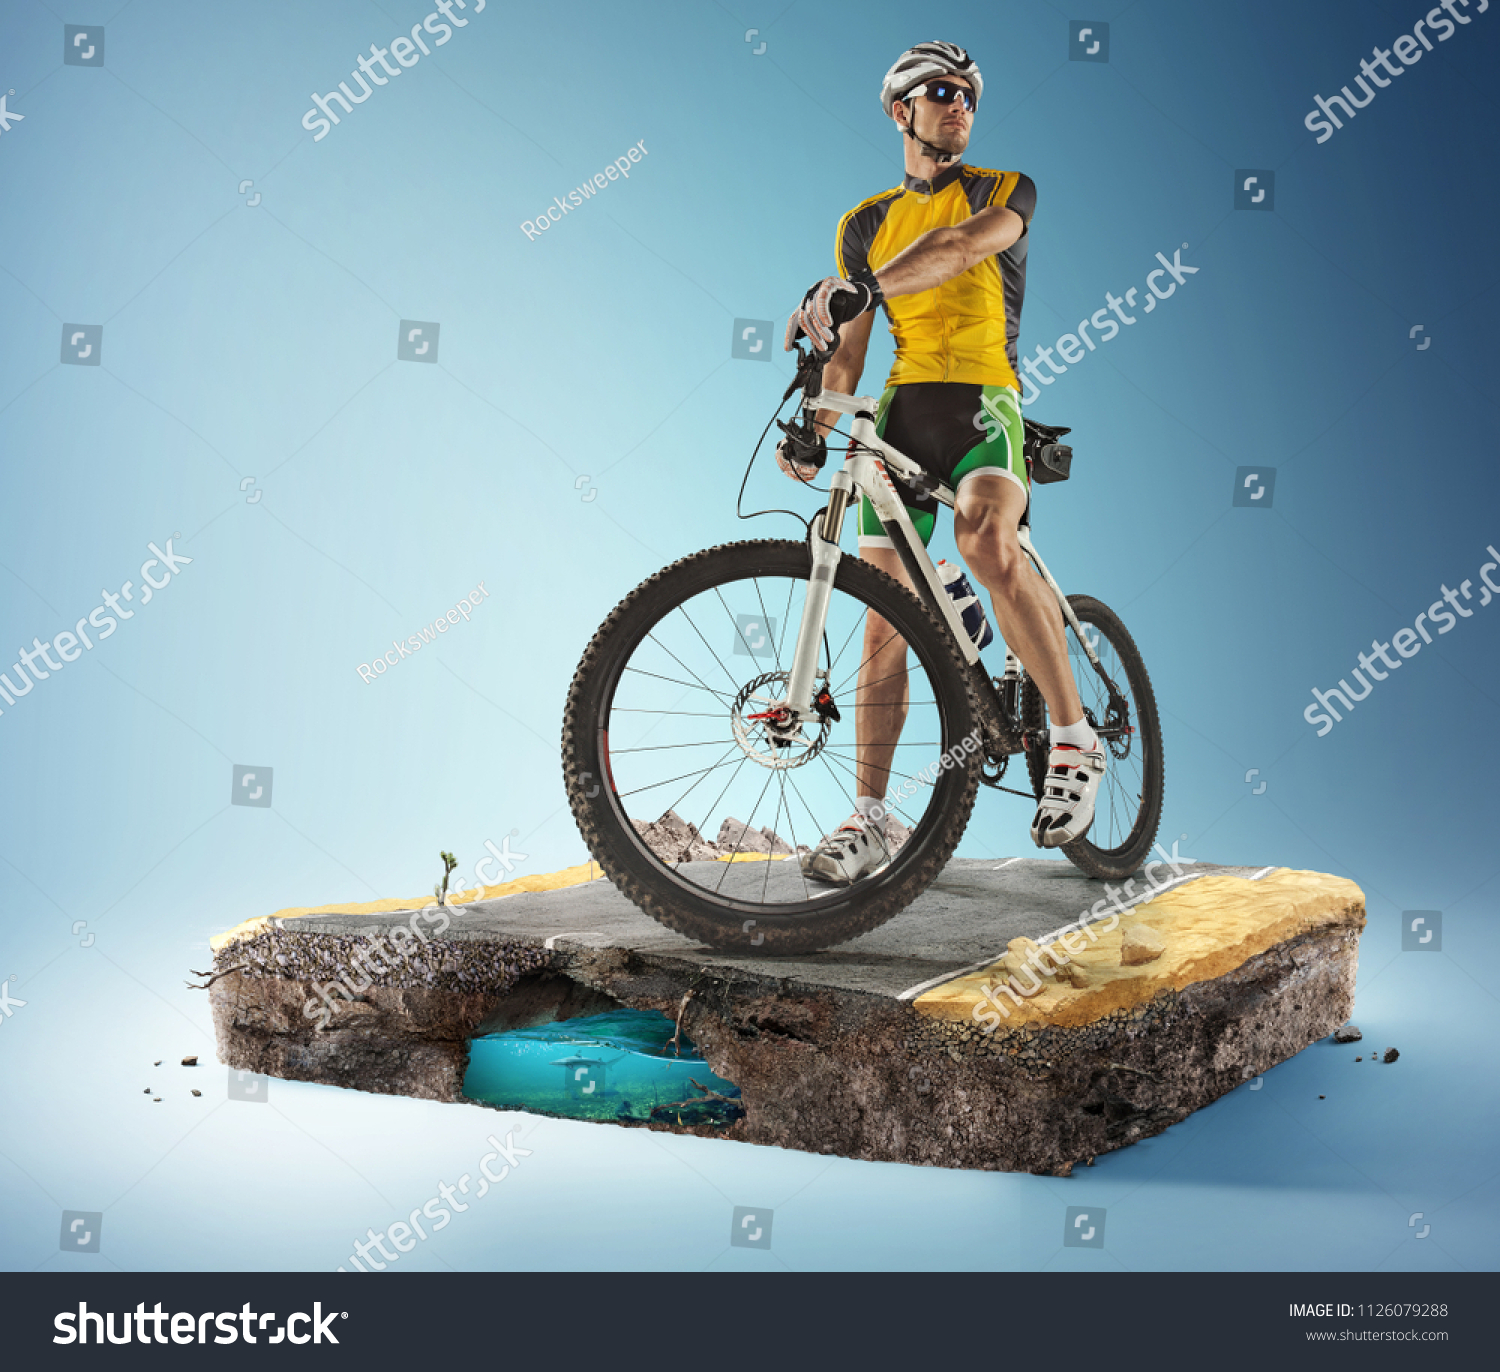 Travel and sports background. 3d illustration with cut of the ground and the desert road.  #1126079288